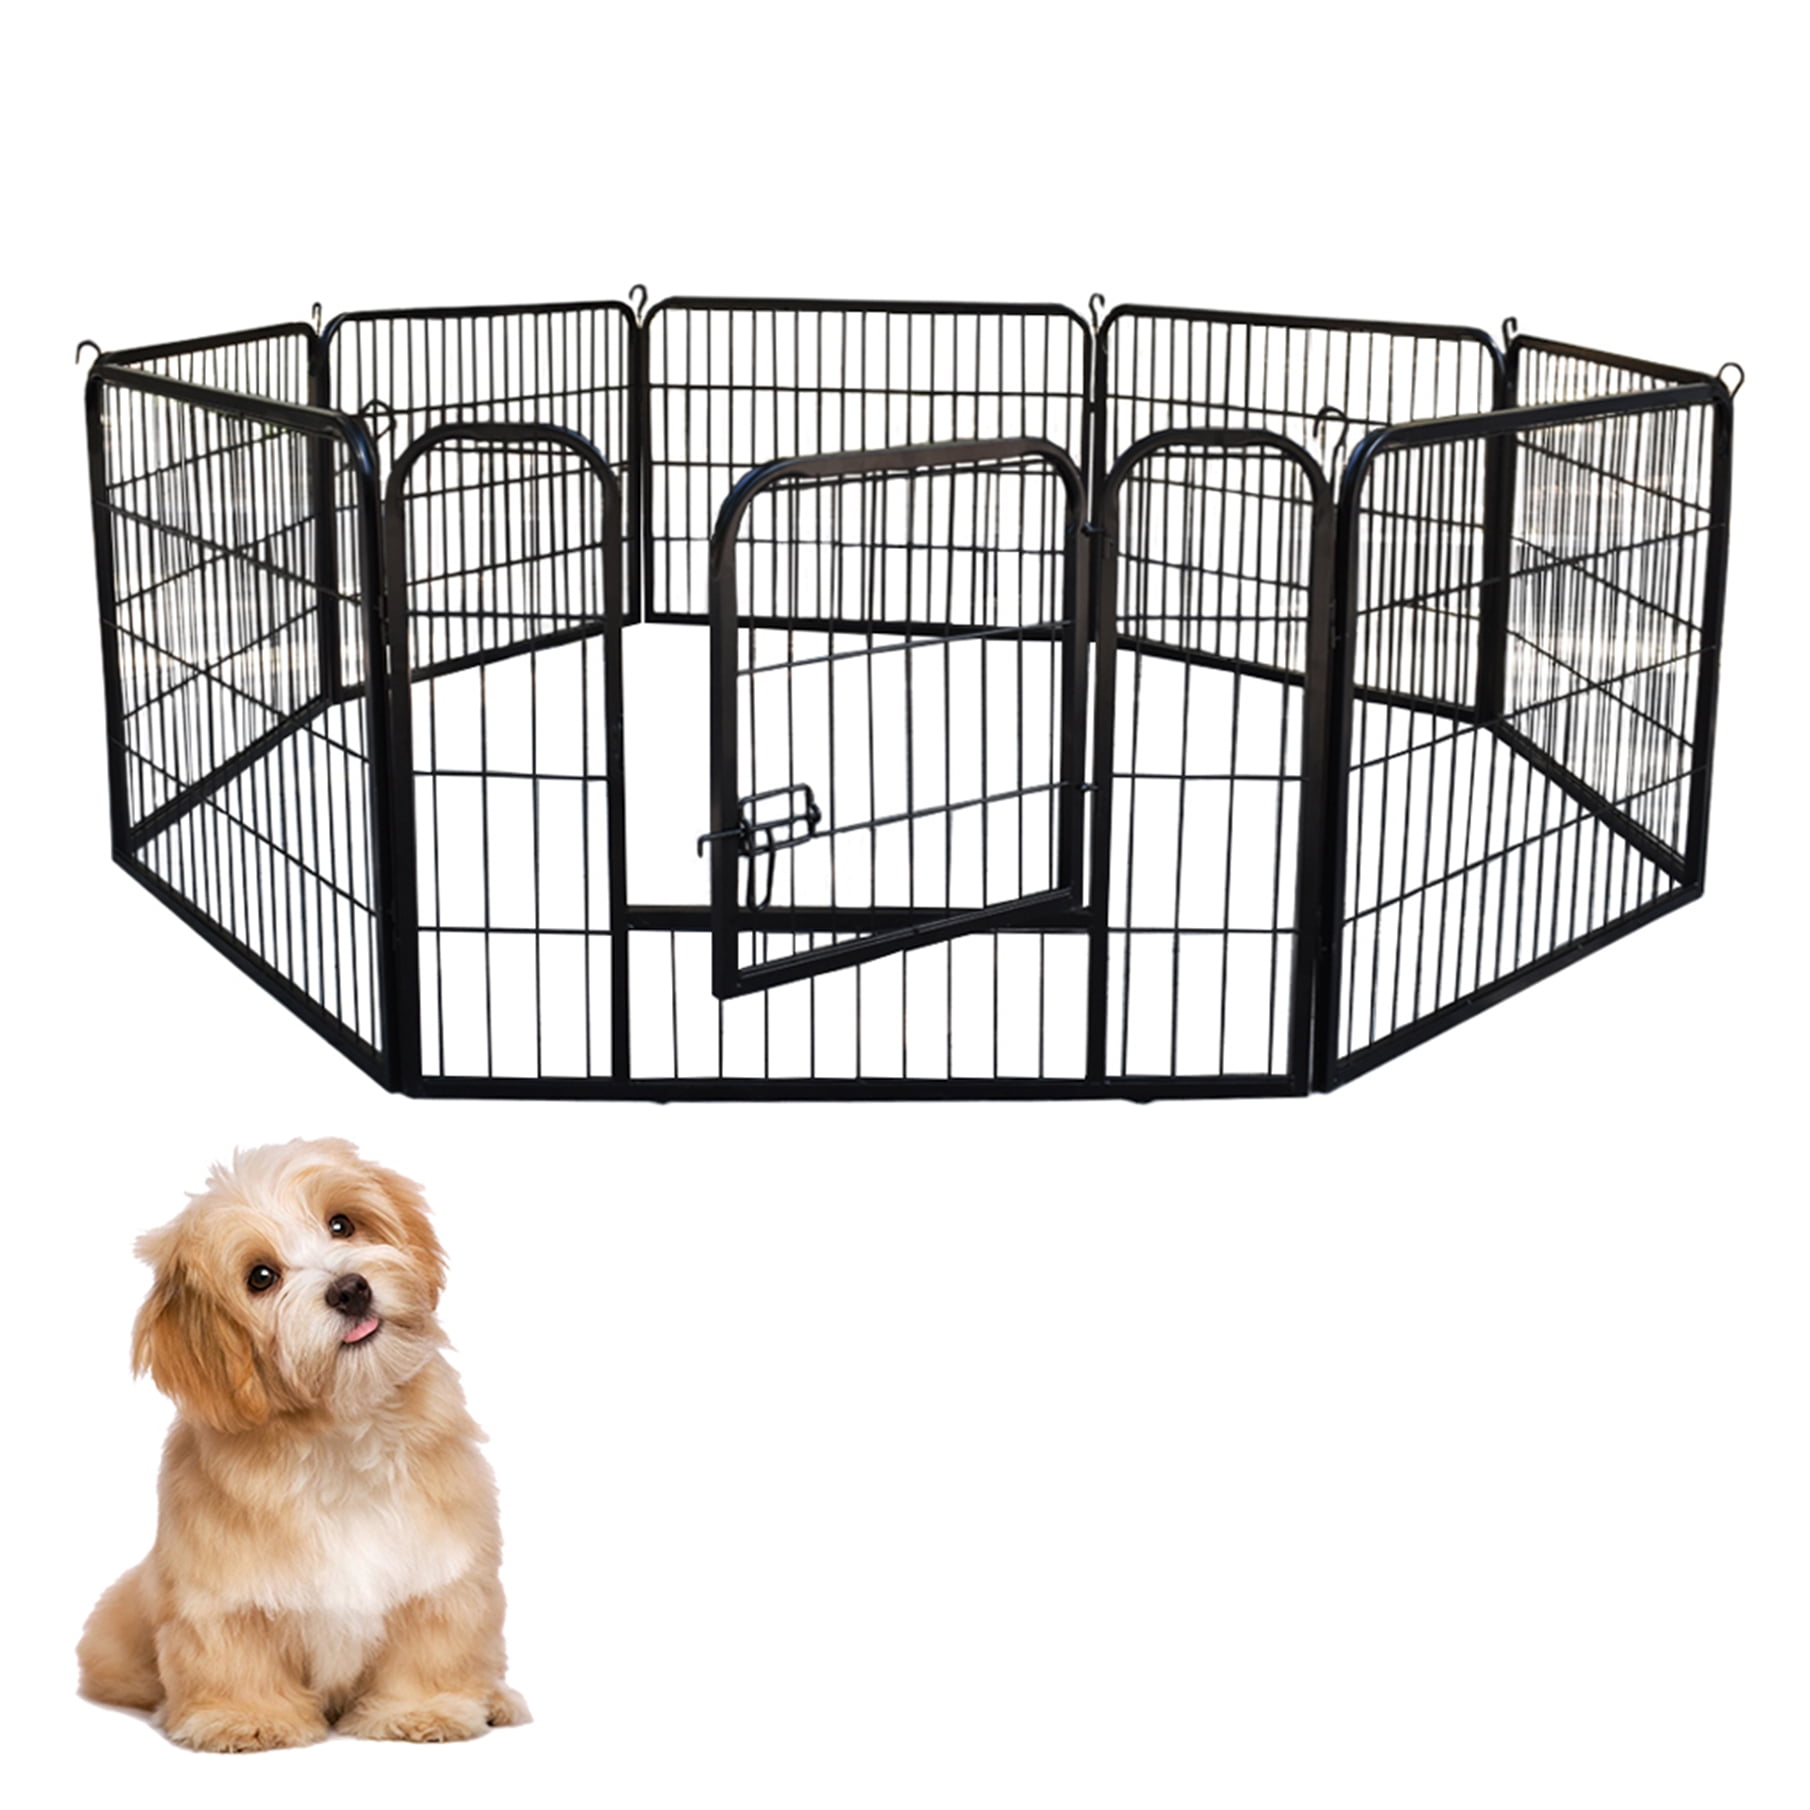 Large Dog Pens Metal Dog Cat Exercise Fence 8 Panel Pet Enclosure Outdoor Indoor Foldable